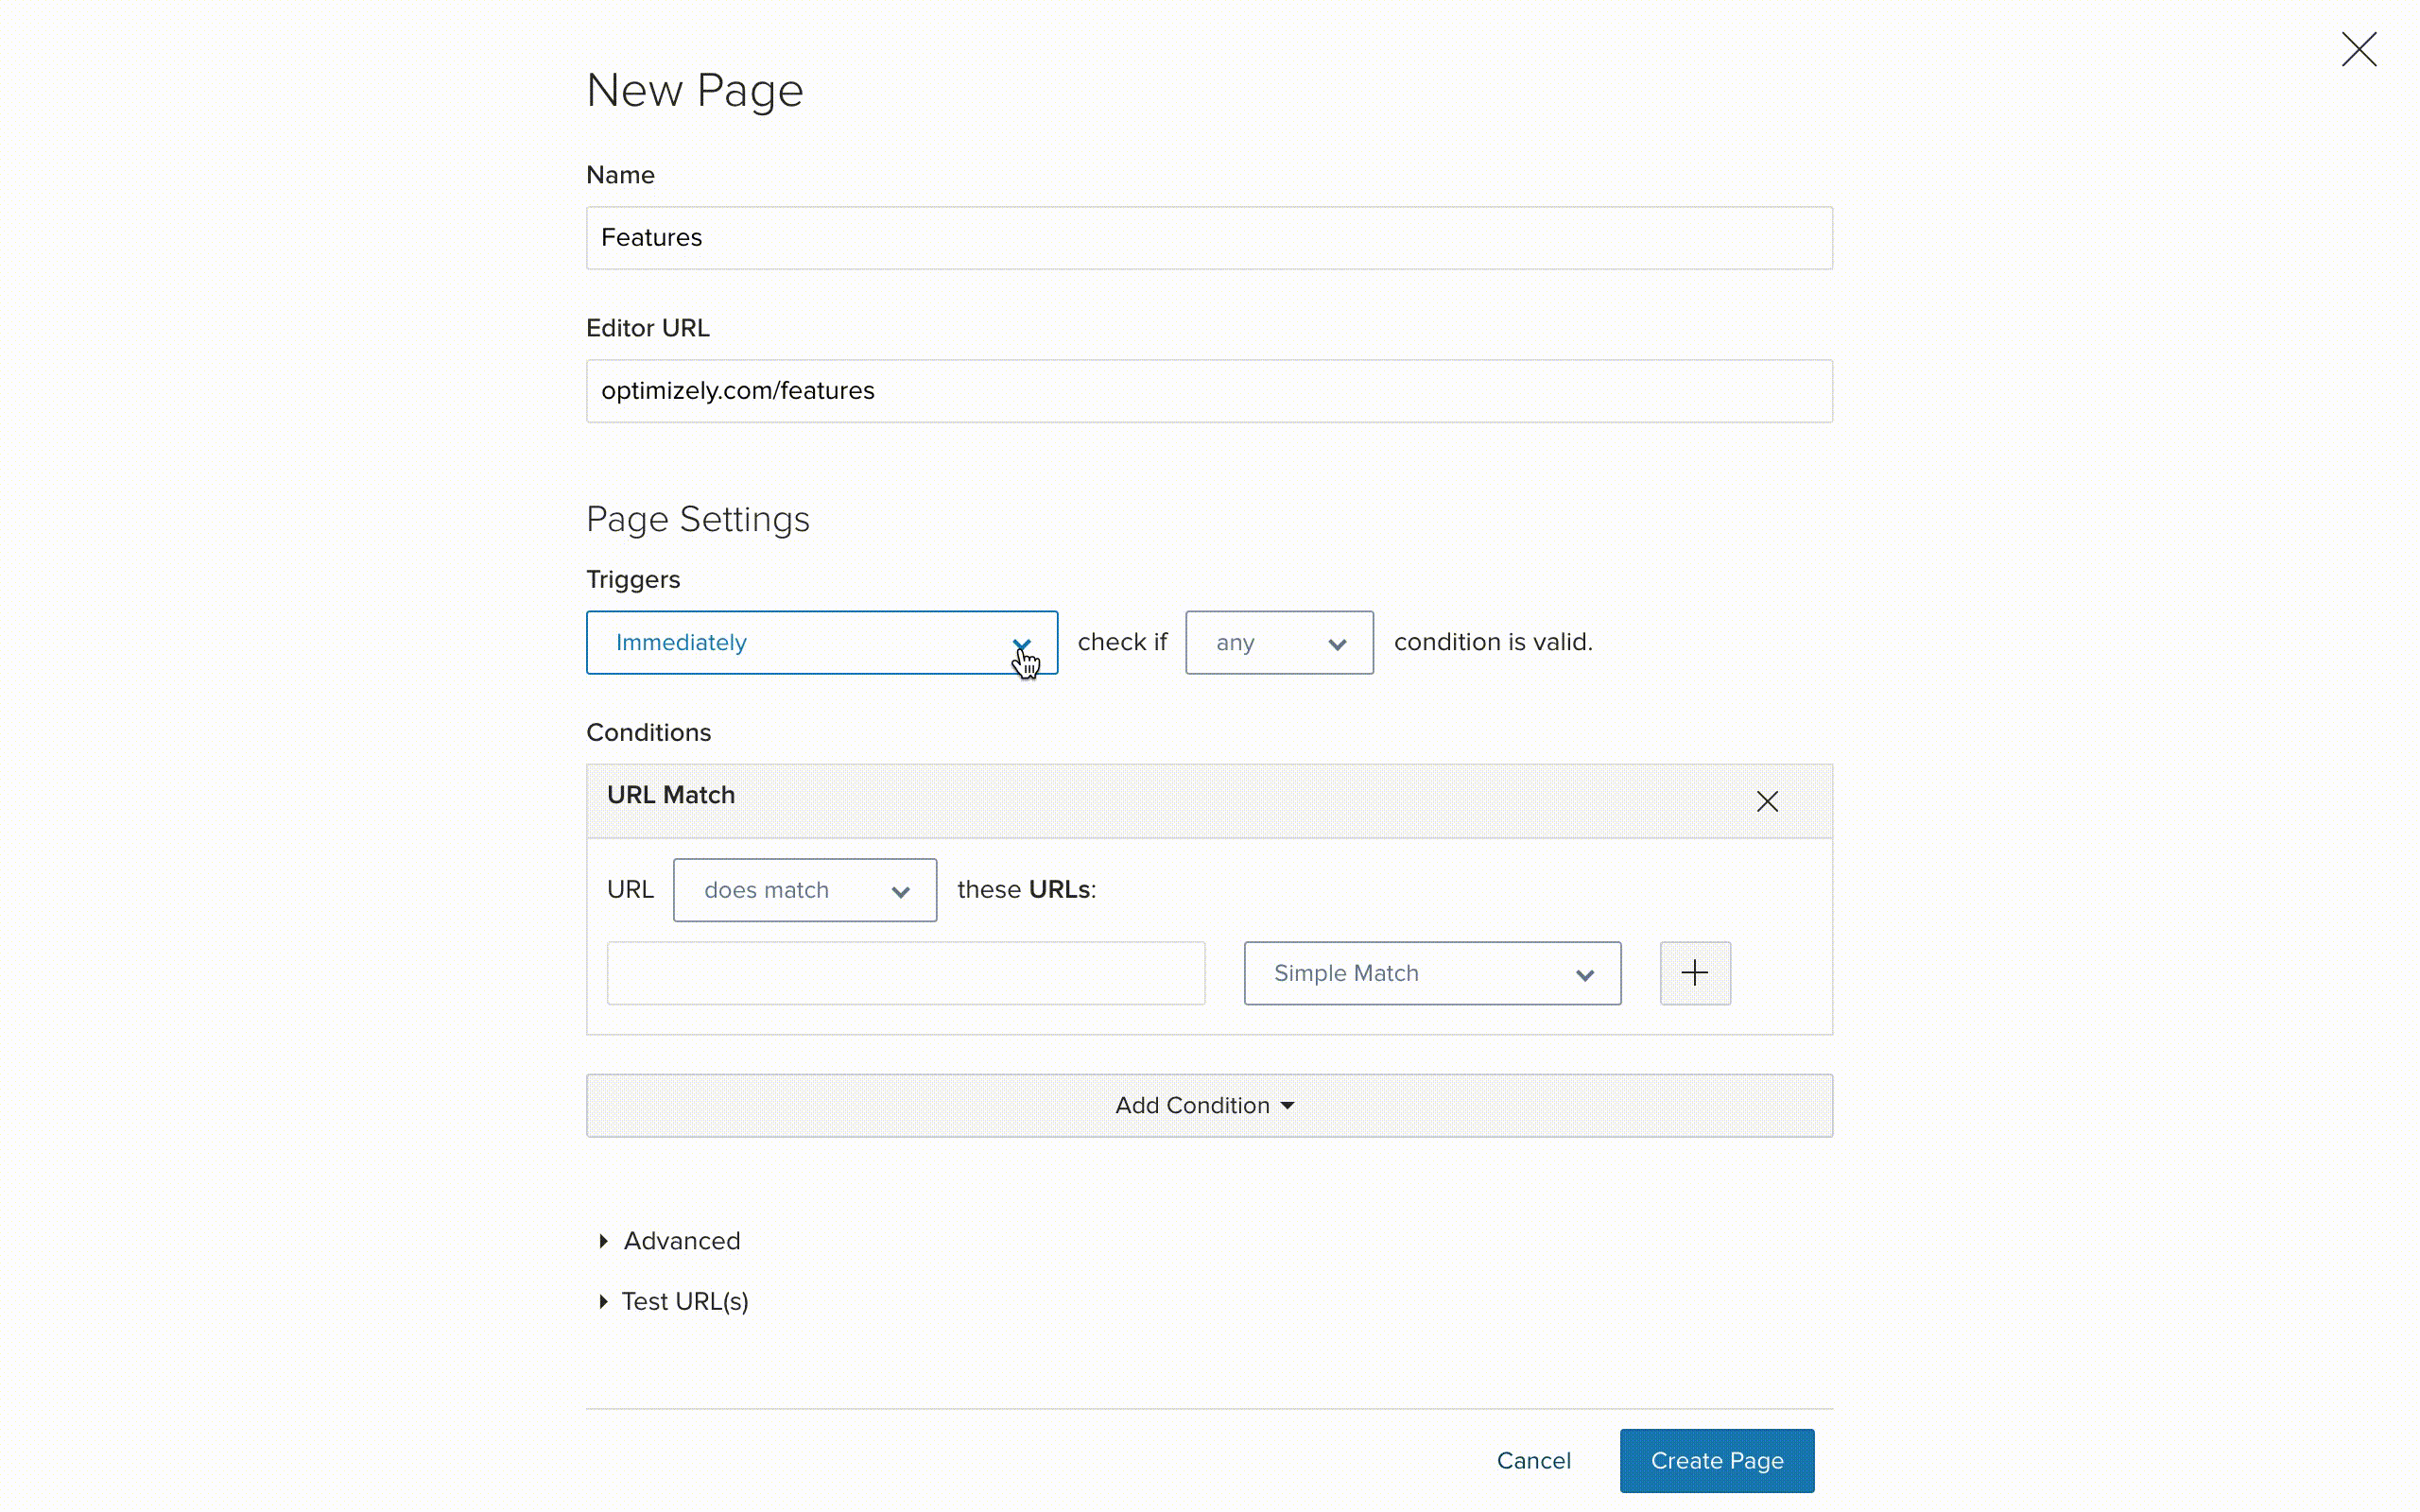 Setting up url matching rules in the interface